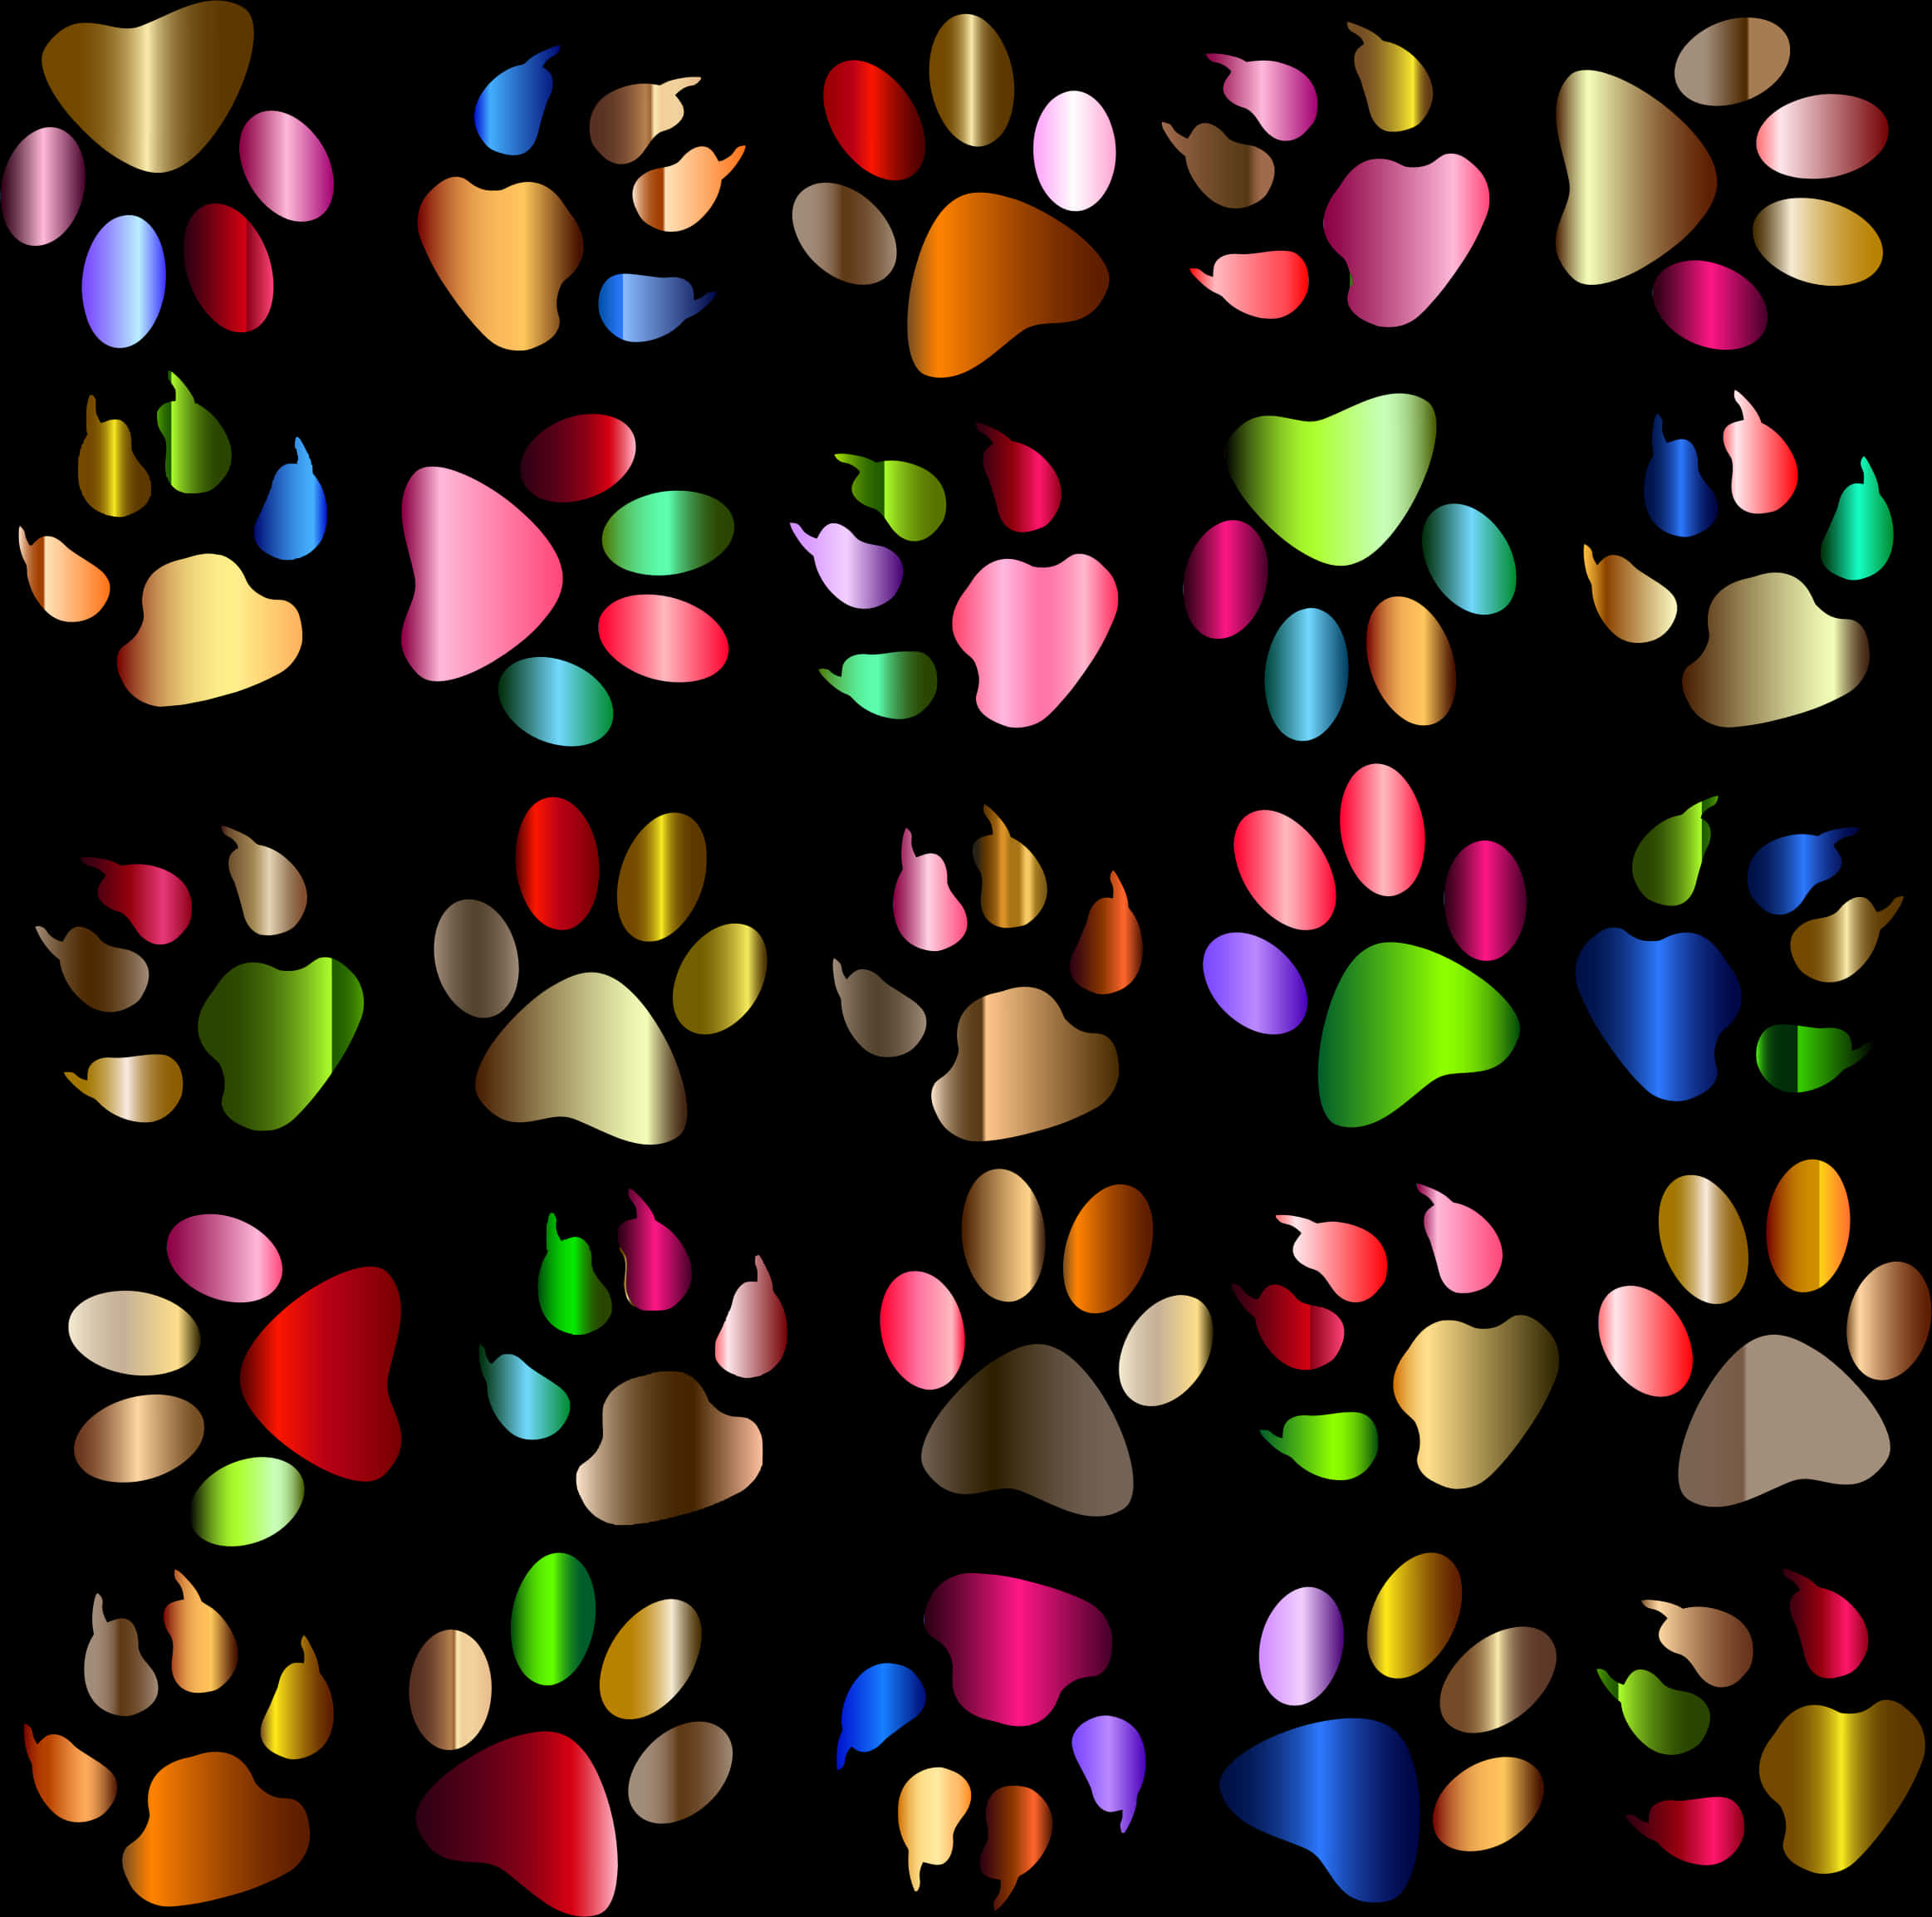 A Group Of Colorful Paw Prints